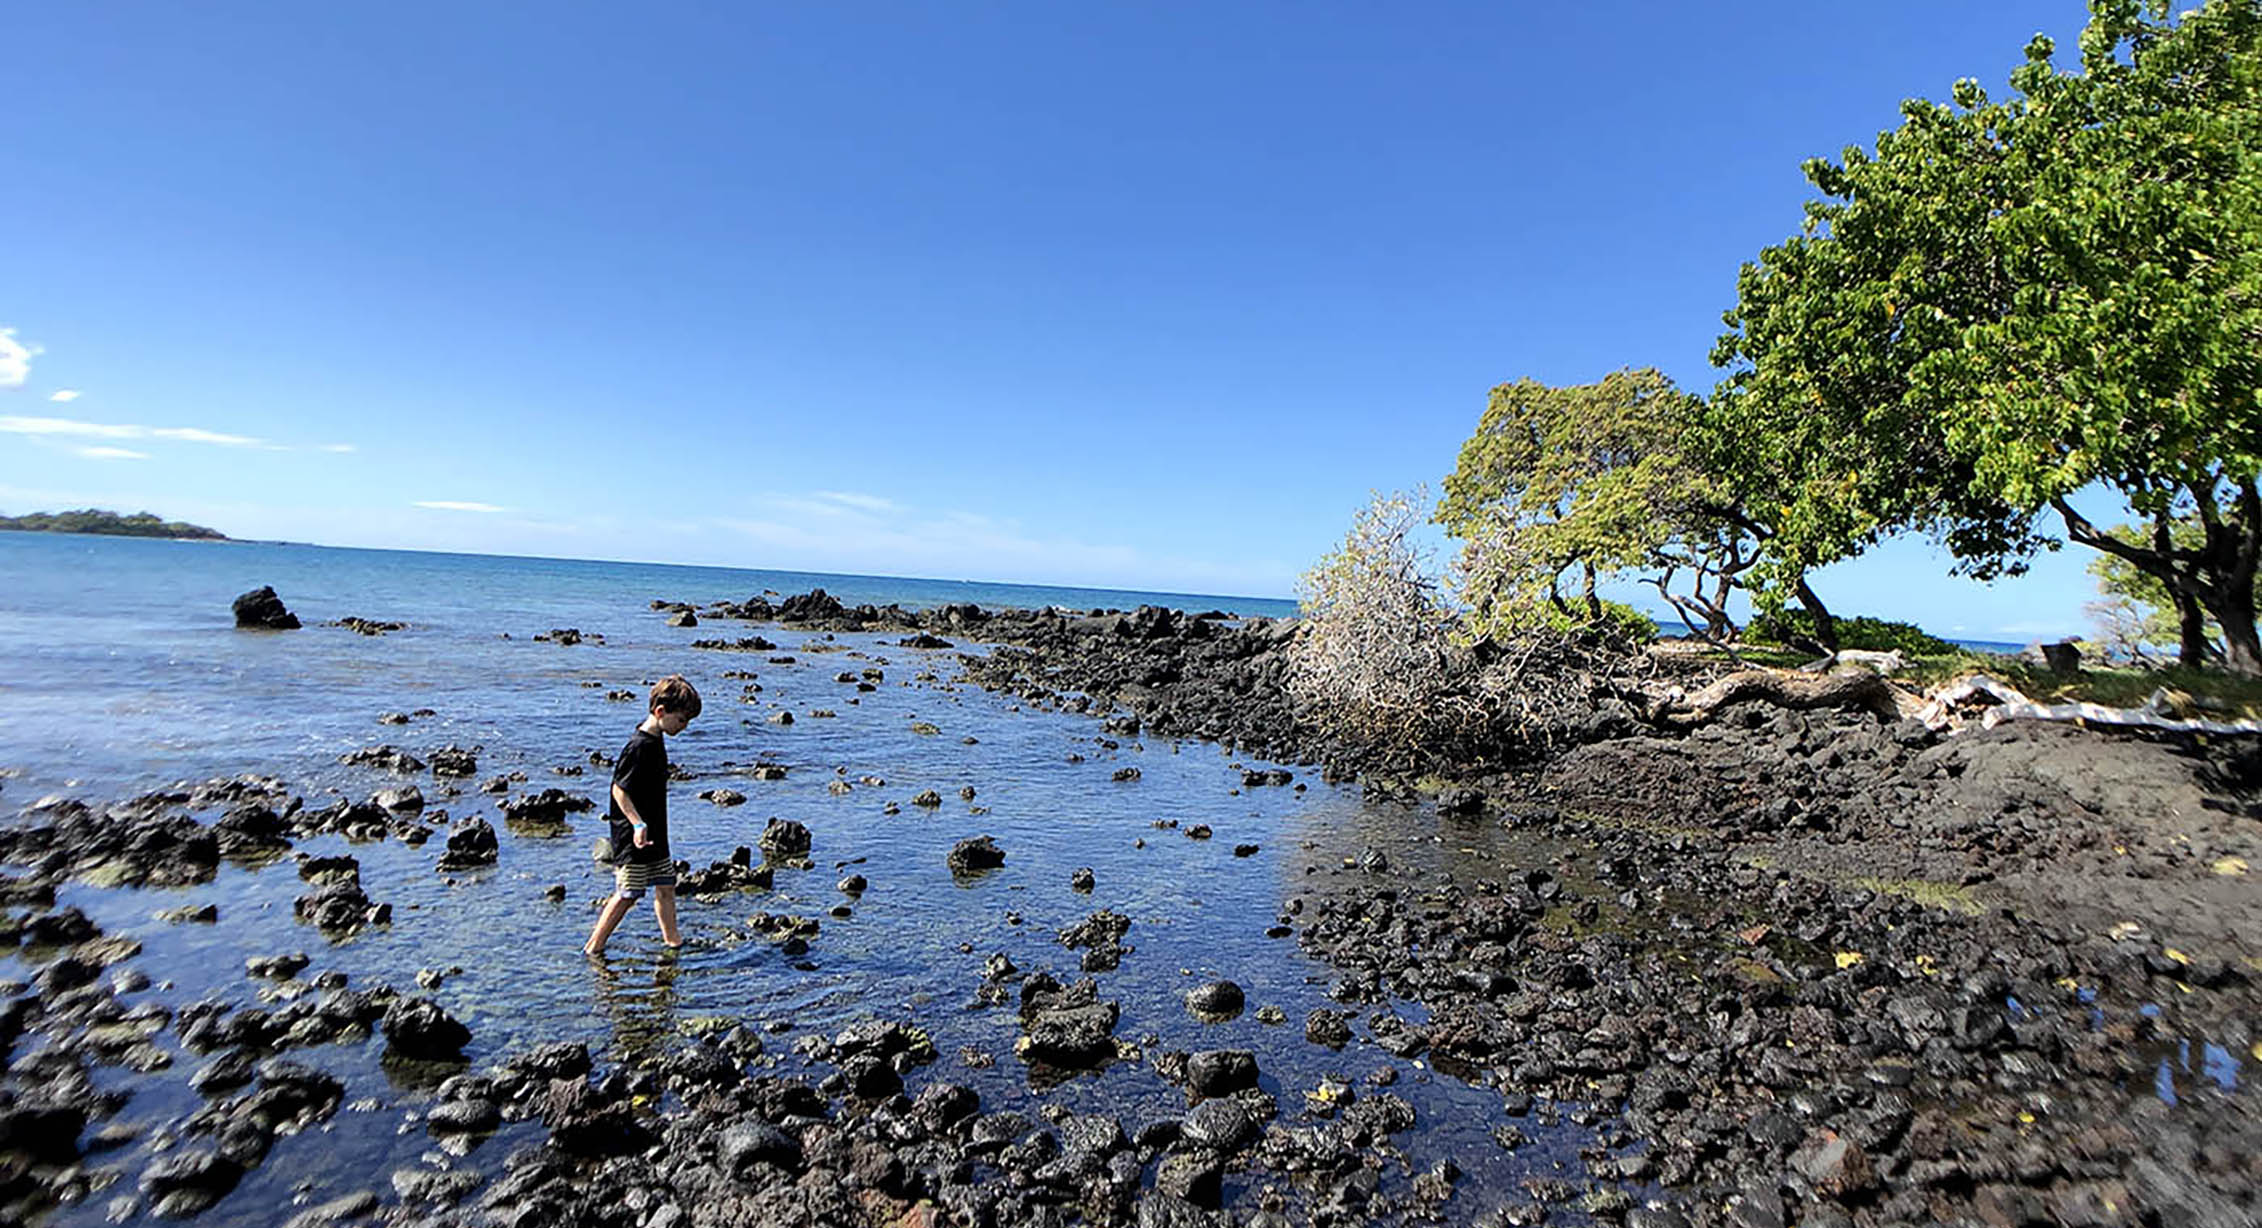 Navigating rocky beaches in Hawaii in KEEN water sandals